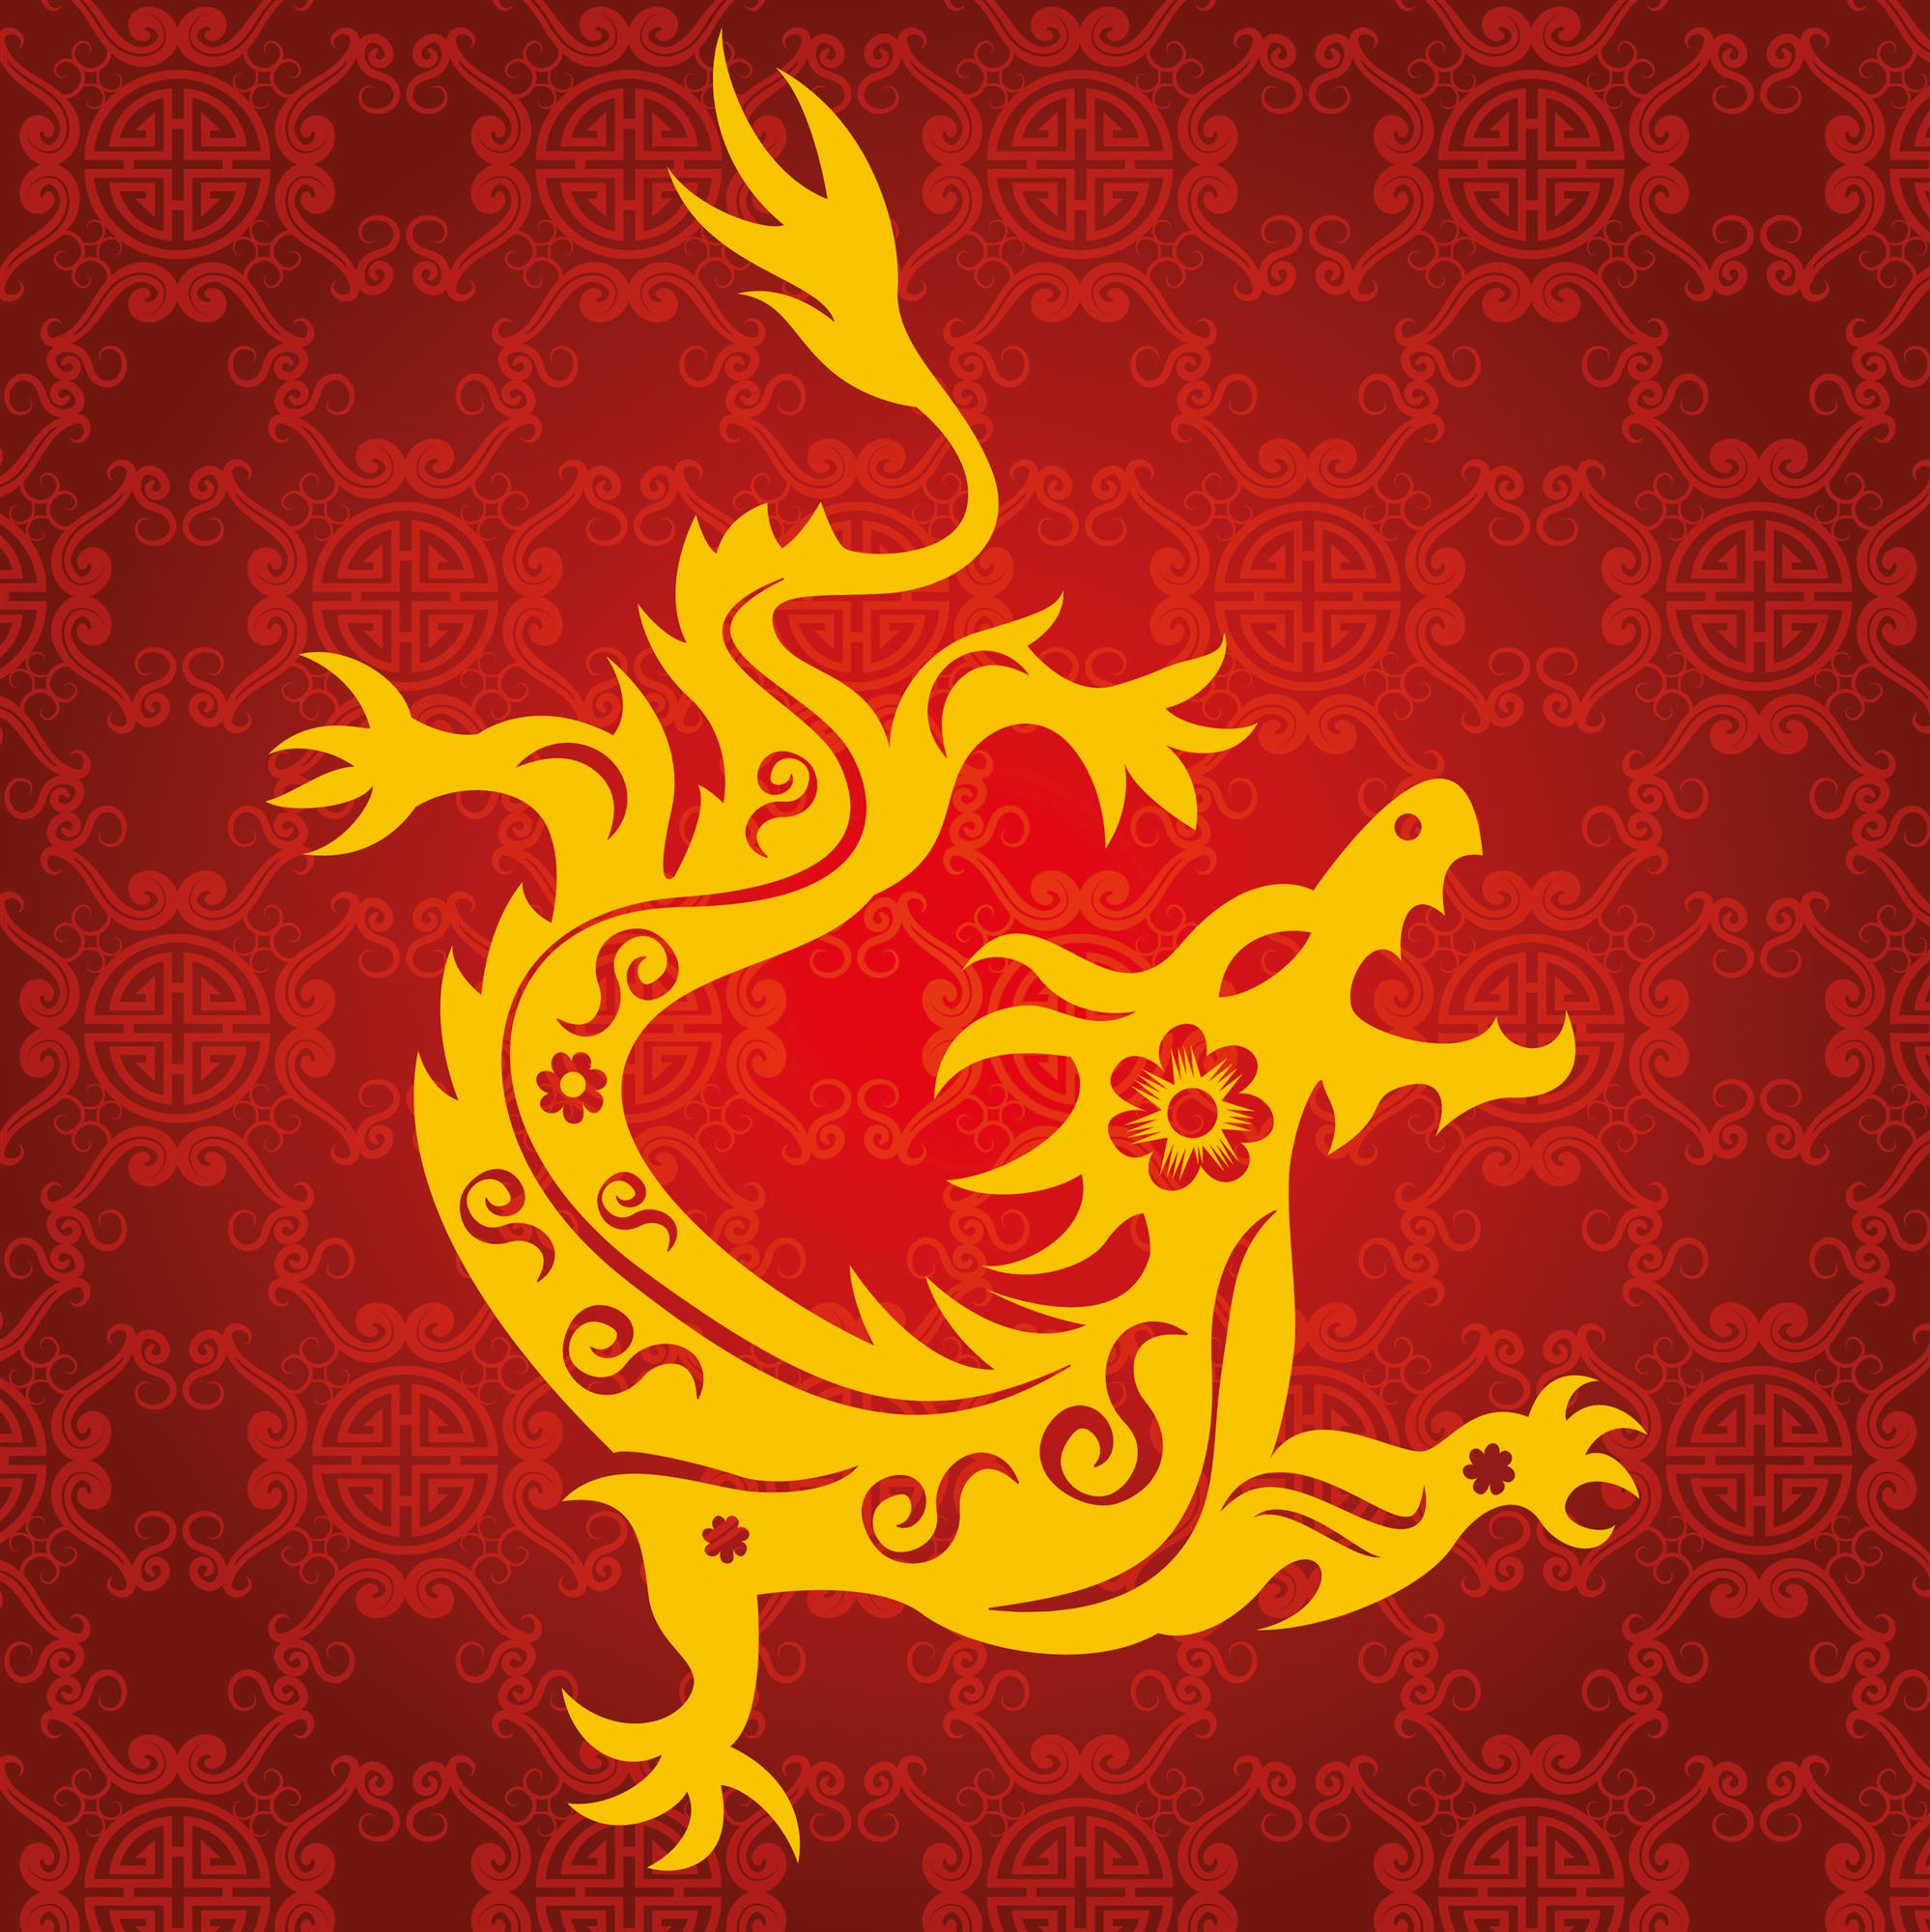 A red and yellow Chinese style illustration of a dragon